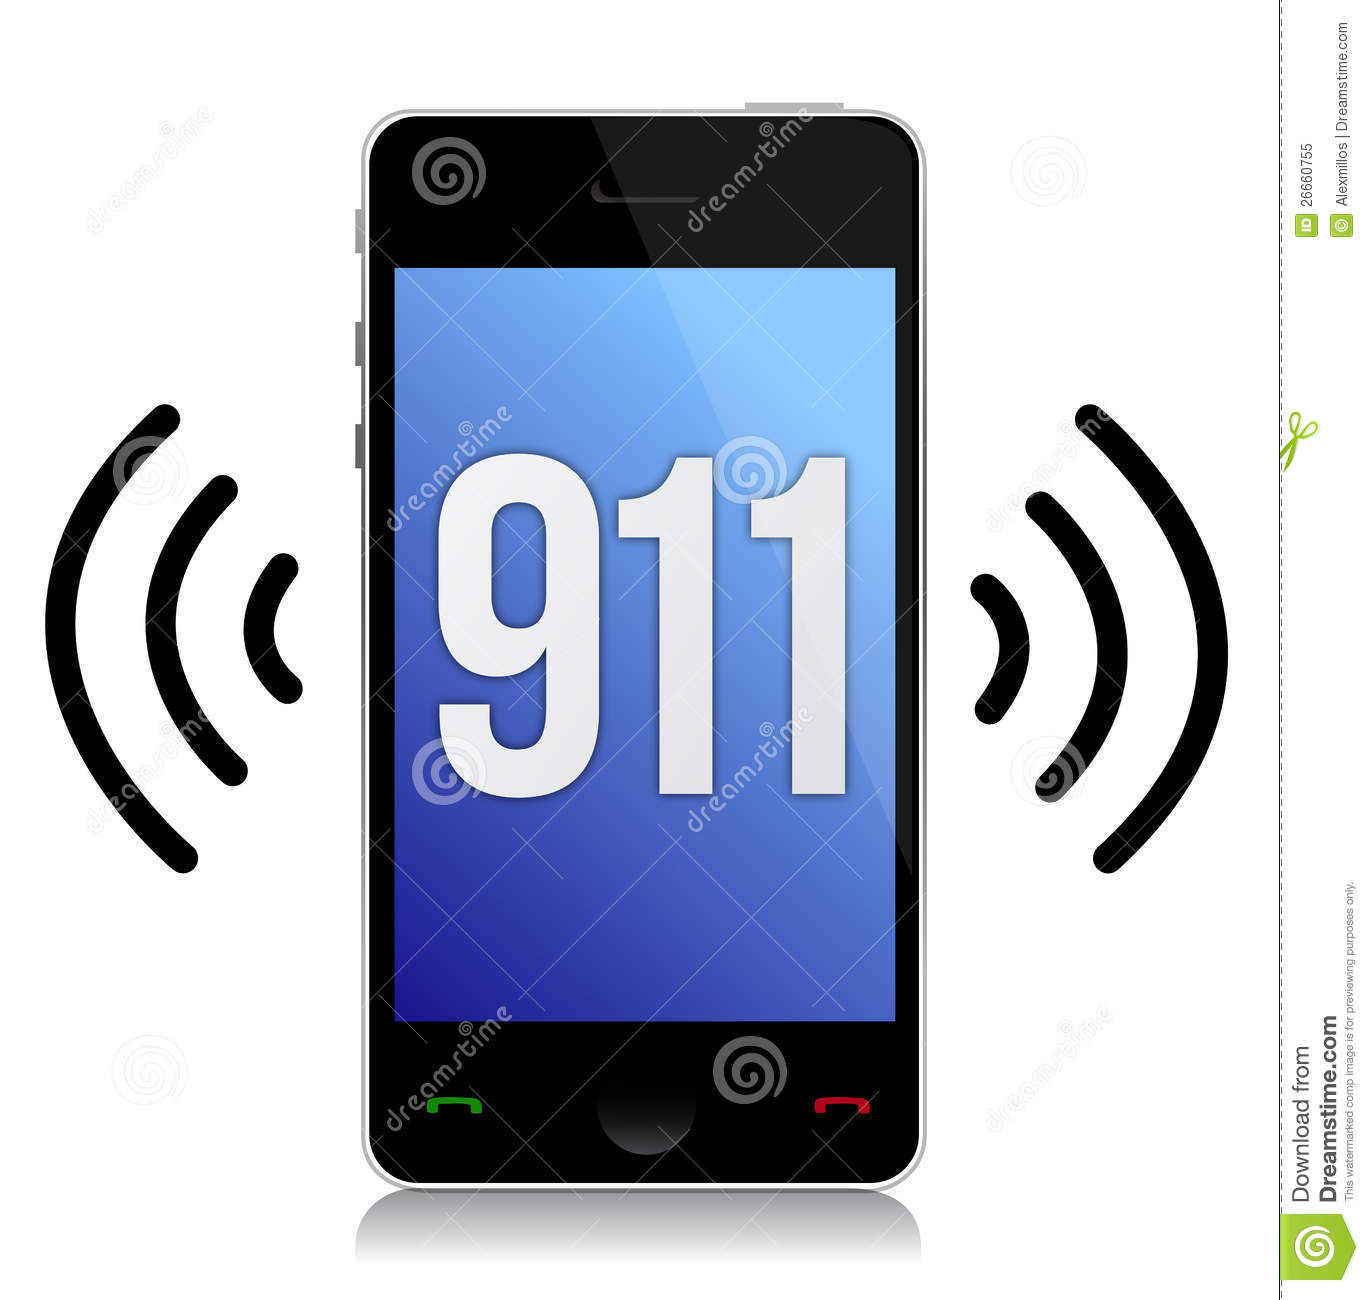 Emergency Number 911 Call Royalty Free Stock Photo   Image  26660755